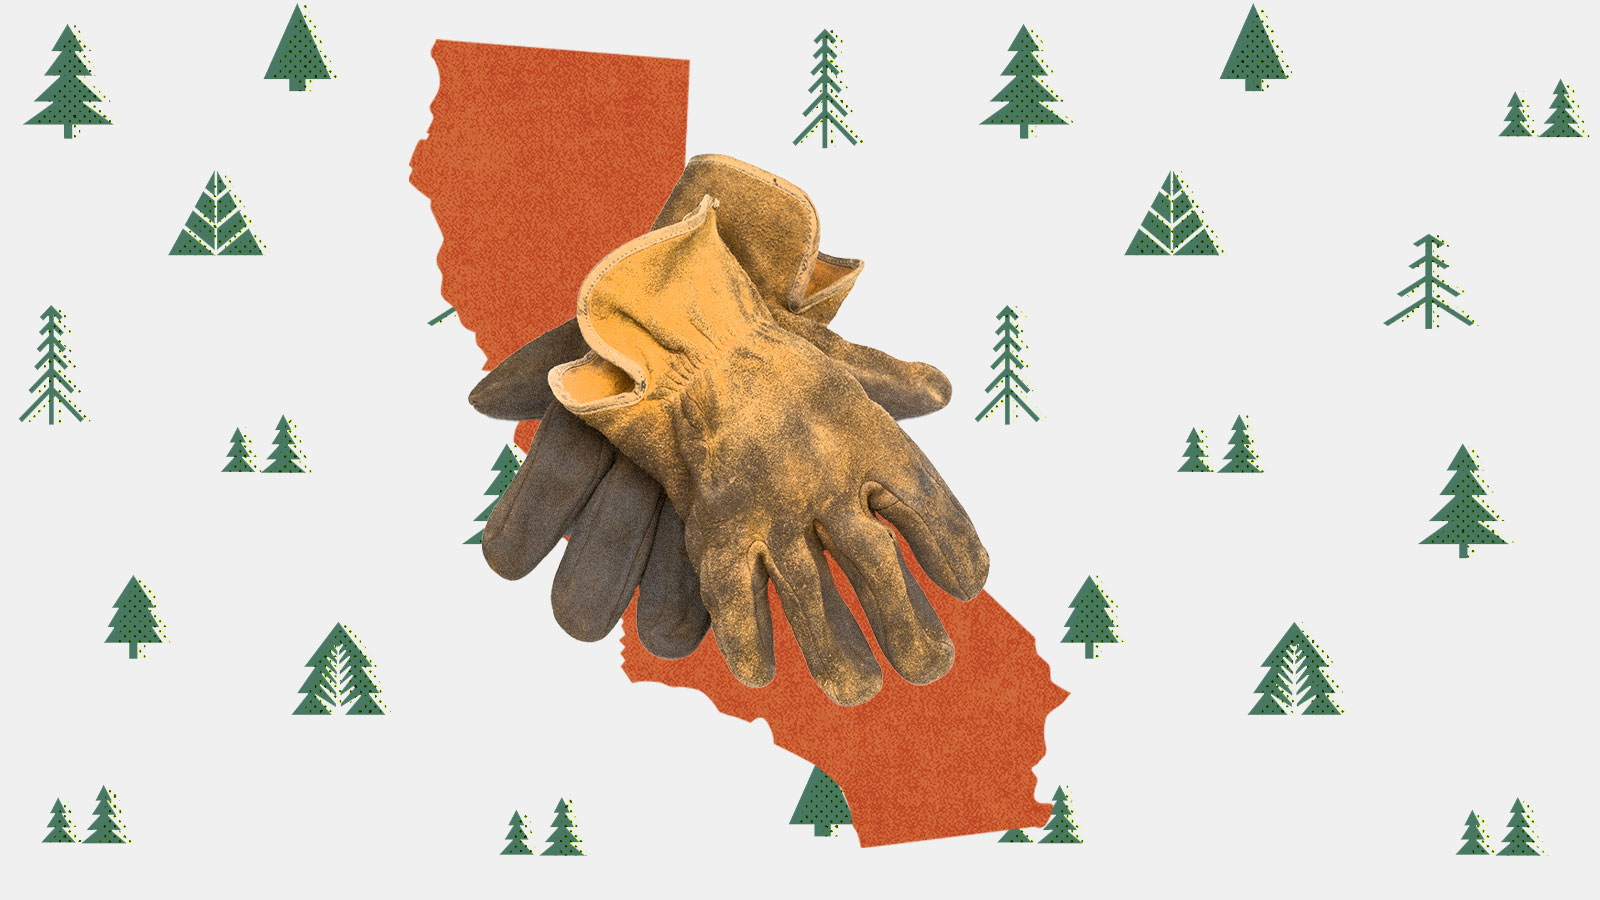 A photo collage of the silhouette of California with a pair of worn work gloves on top, and a background of illustrated conifer trees.